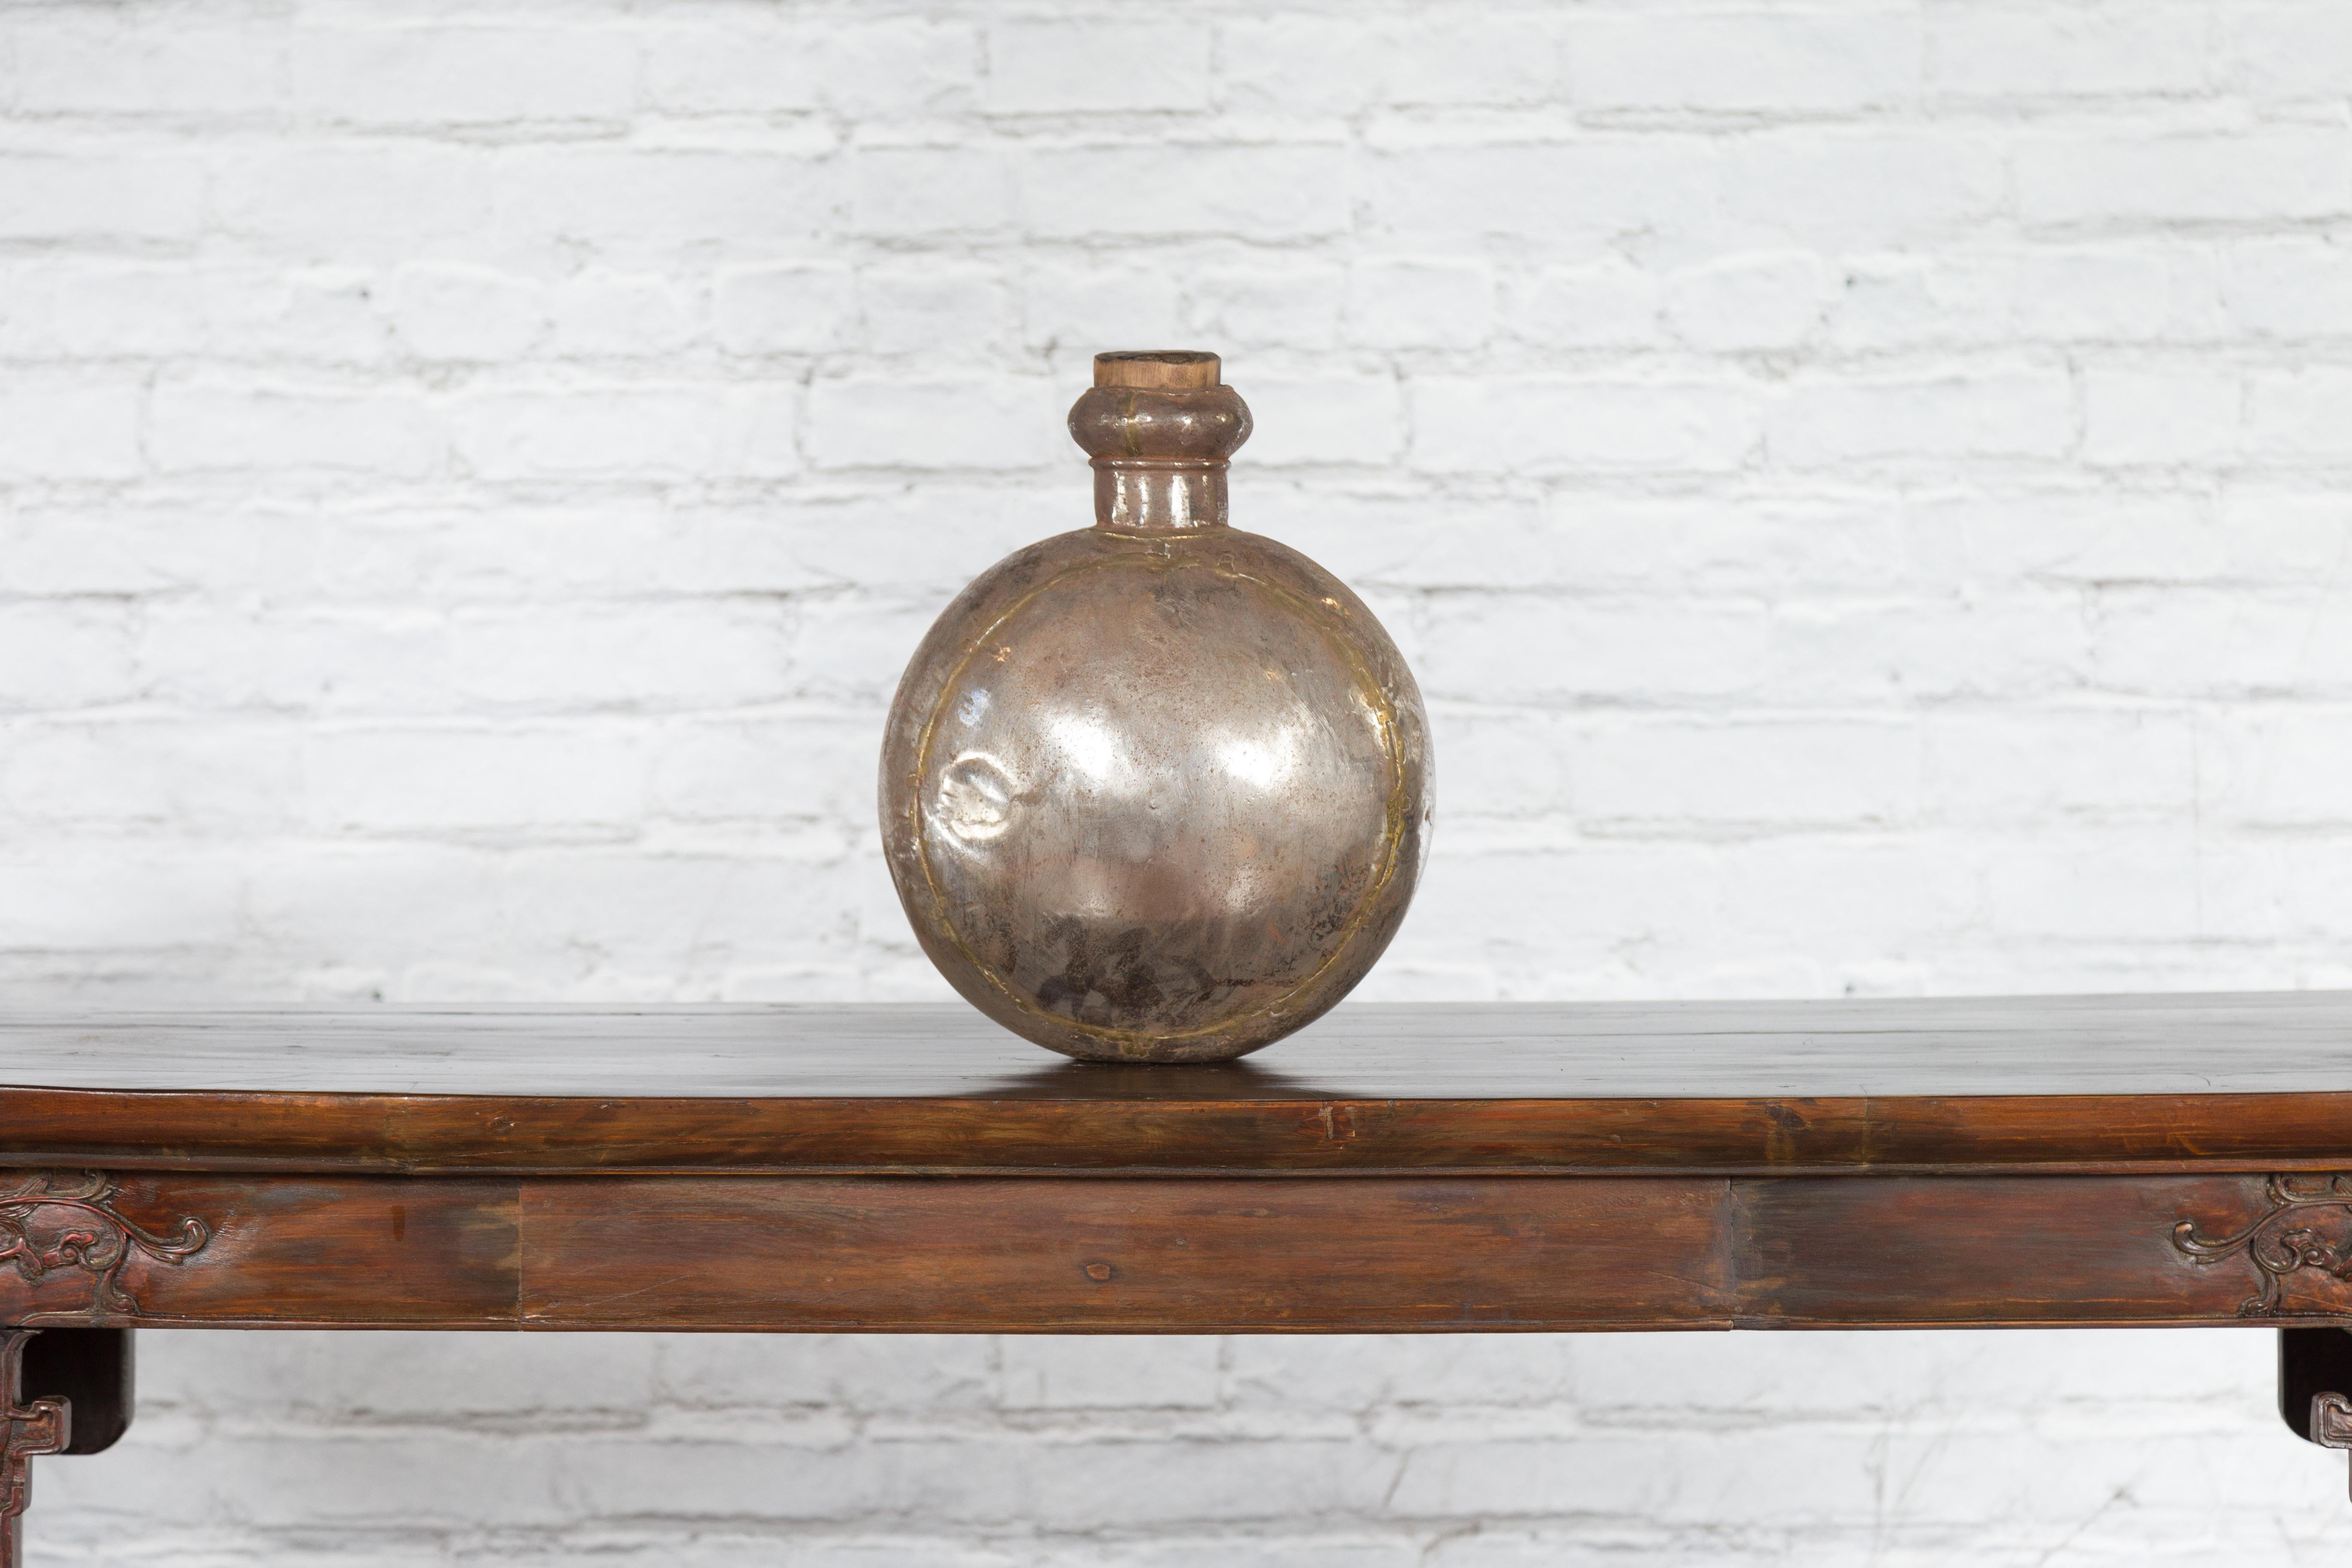 A vintage Indian metal water vase from the mid-20th century, with circular belly and cork inspired wooden top. Crafted in India during the midcentury period, this metal water vase charms our eyes with its round silhouette lines and nicely weathered